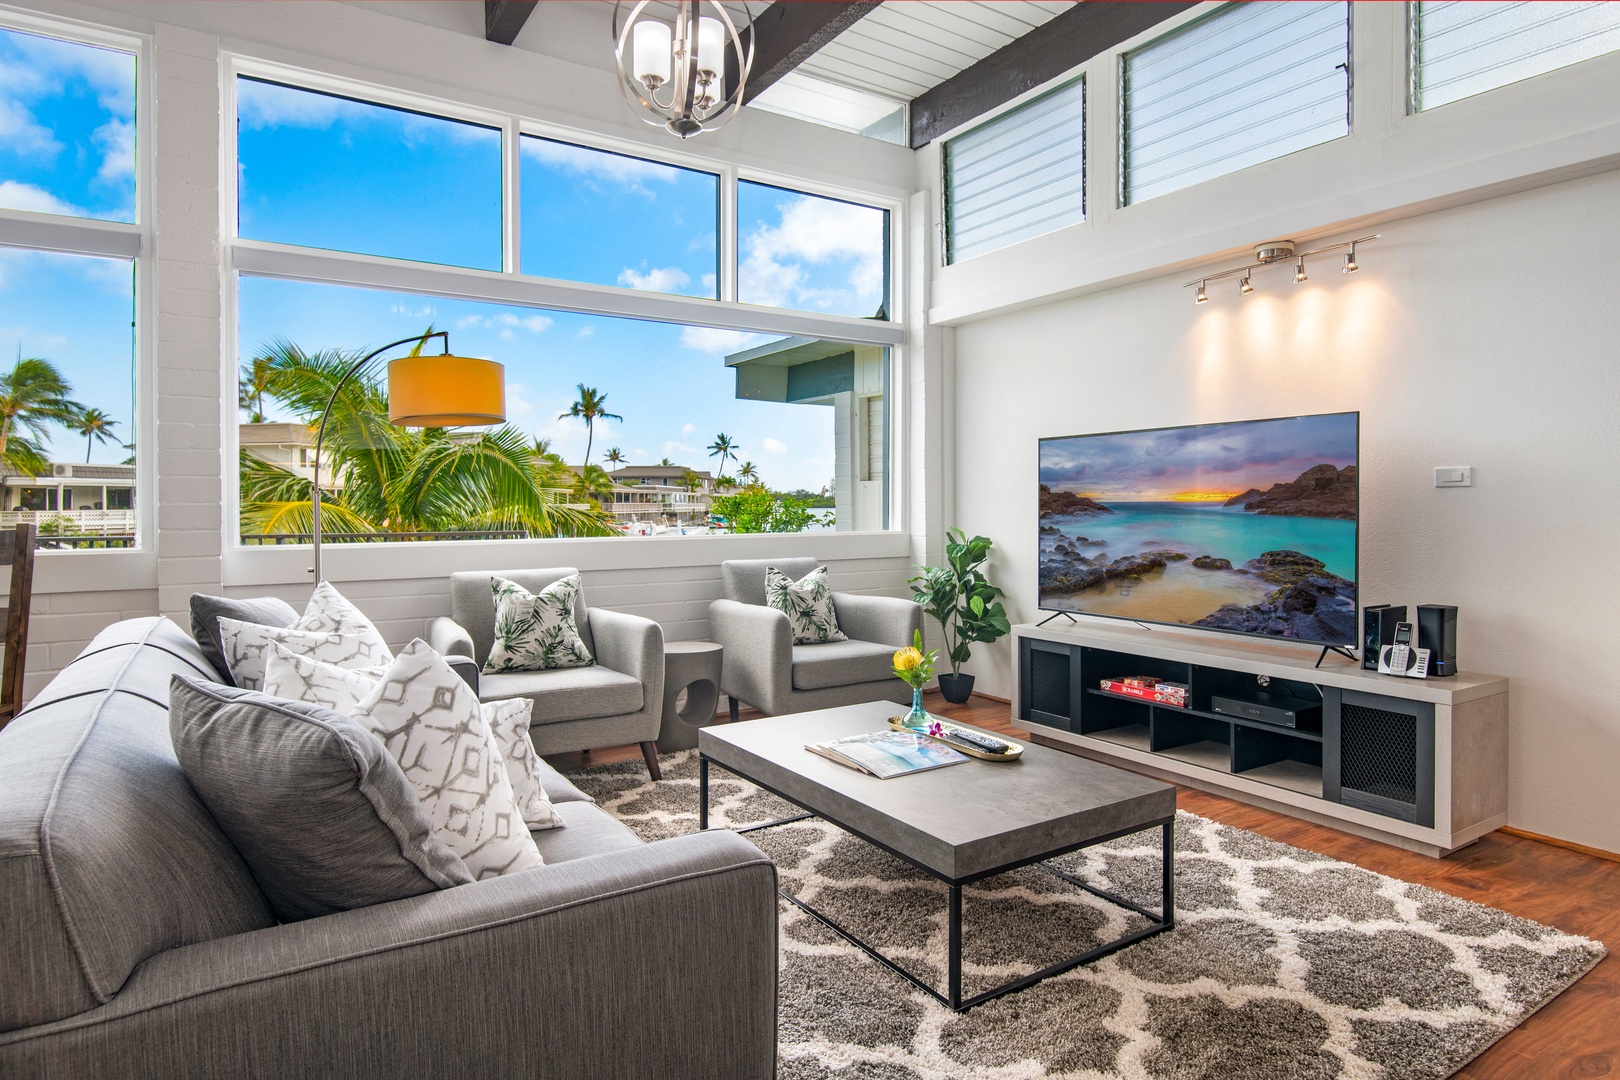 Honolulu Vacation Rentals, Holoholo Hale - Open floor plan living room with large tv and marina views! (Living room includes a sleeper sofa.)